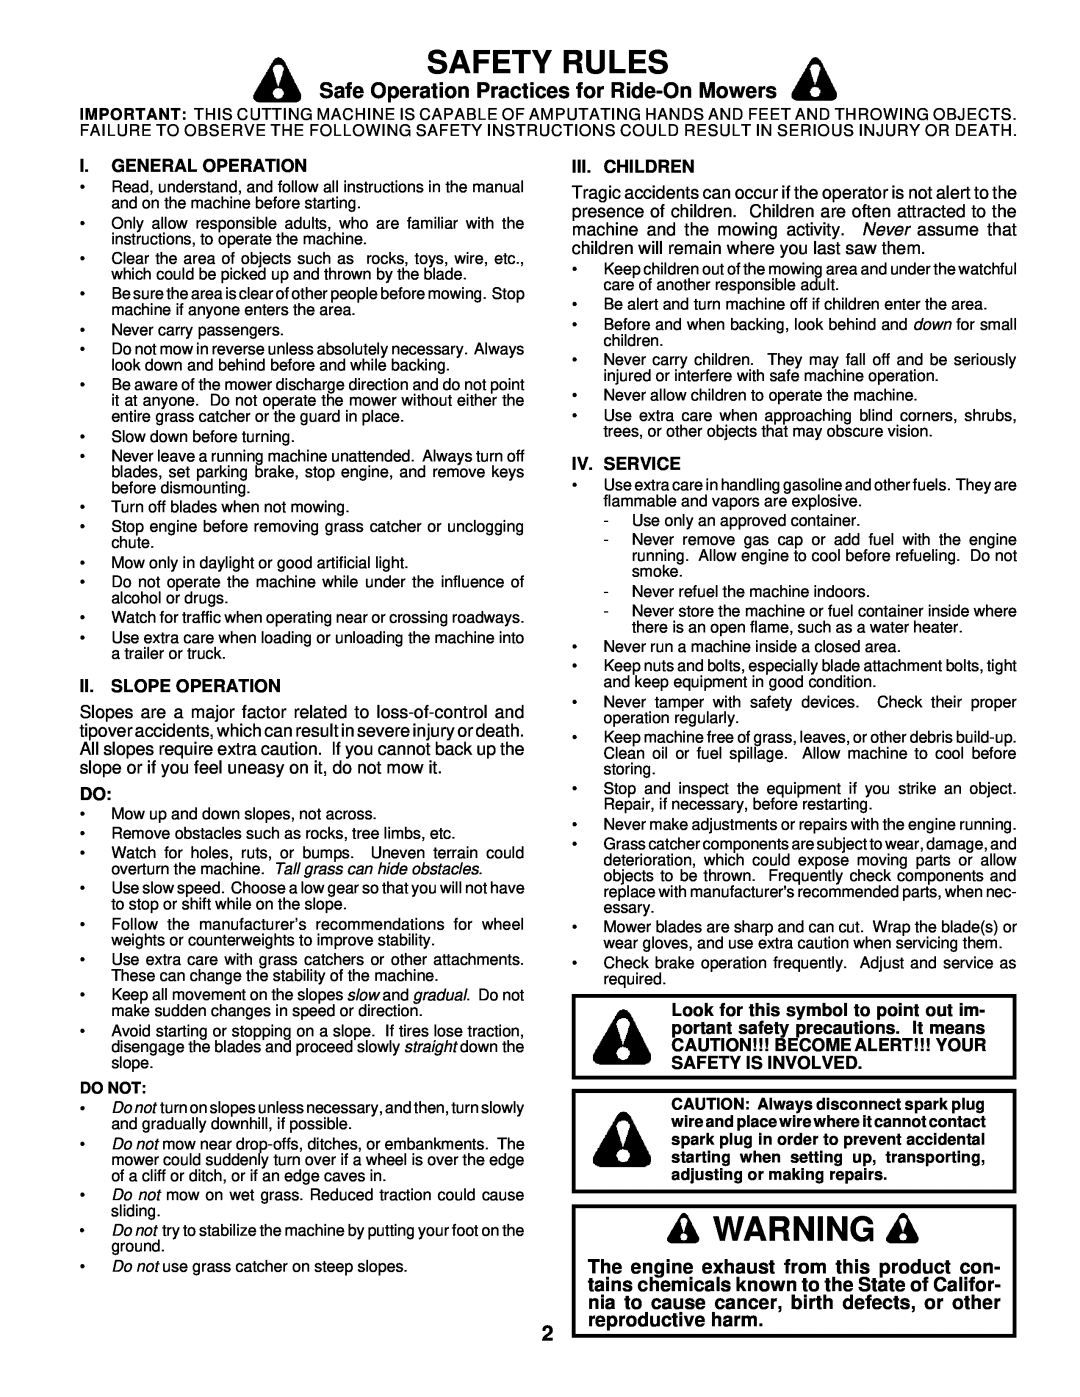 Husqvarna LR122 Safety Rules, Safe Operation Practices for Ride-On Mowers, I. General Operation, Ii. Slope Operation 